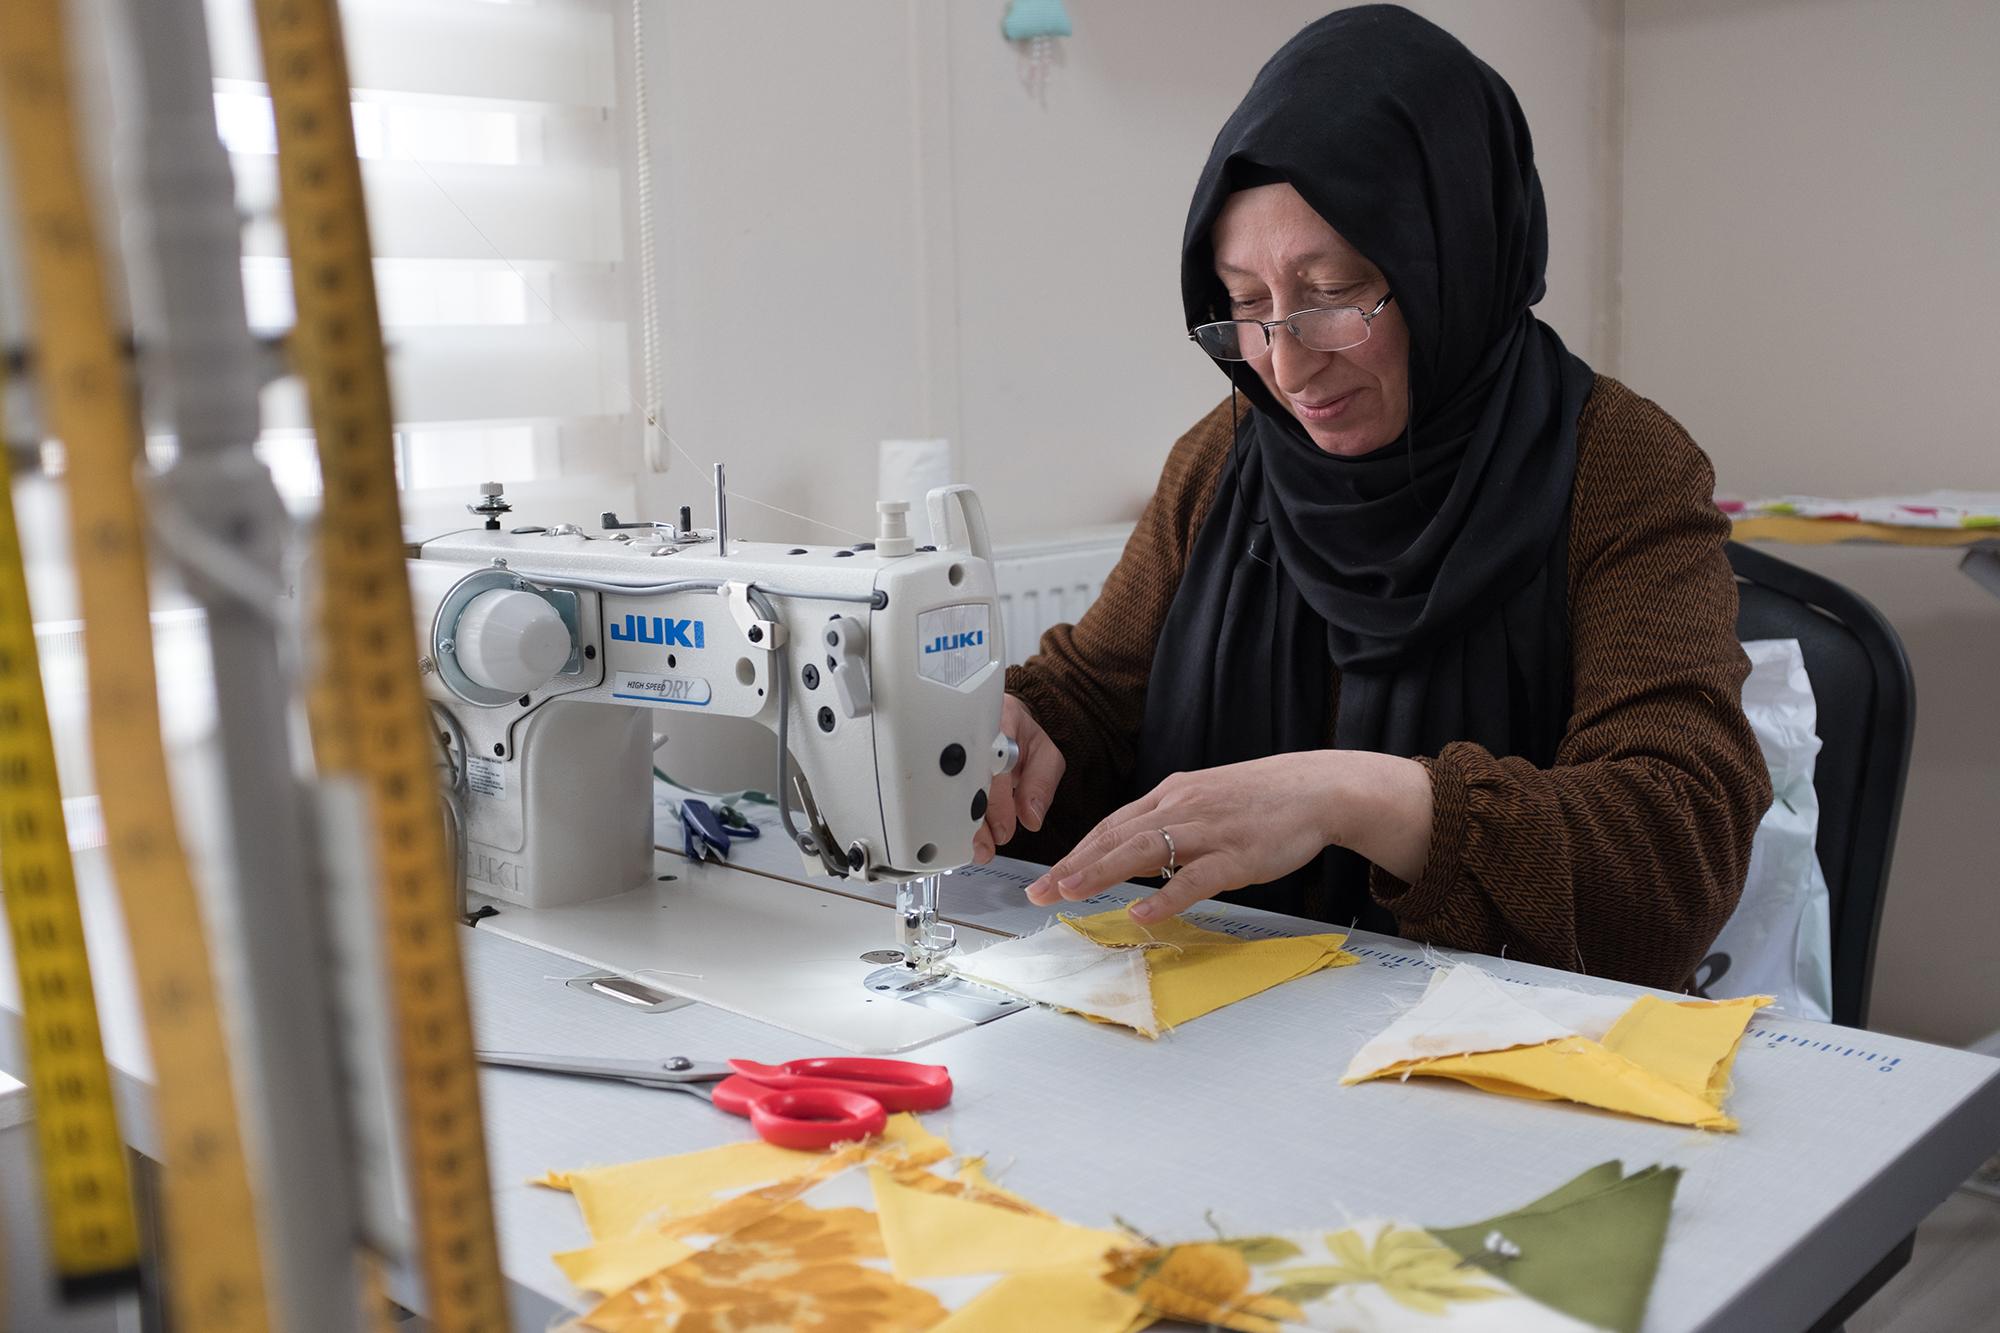 Women at the front line of the economic crisis - At the Ismek center in Fatih, the handicraft sector,...